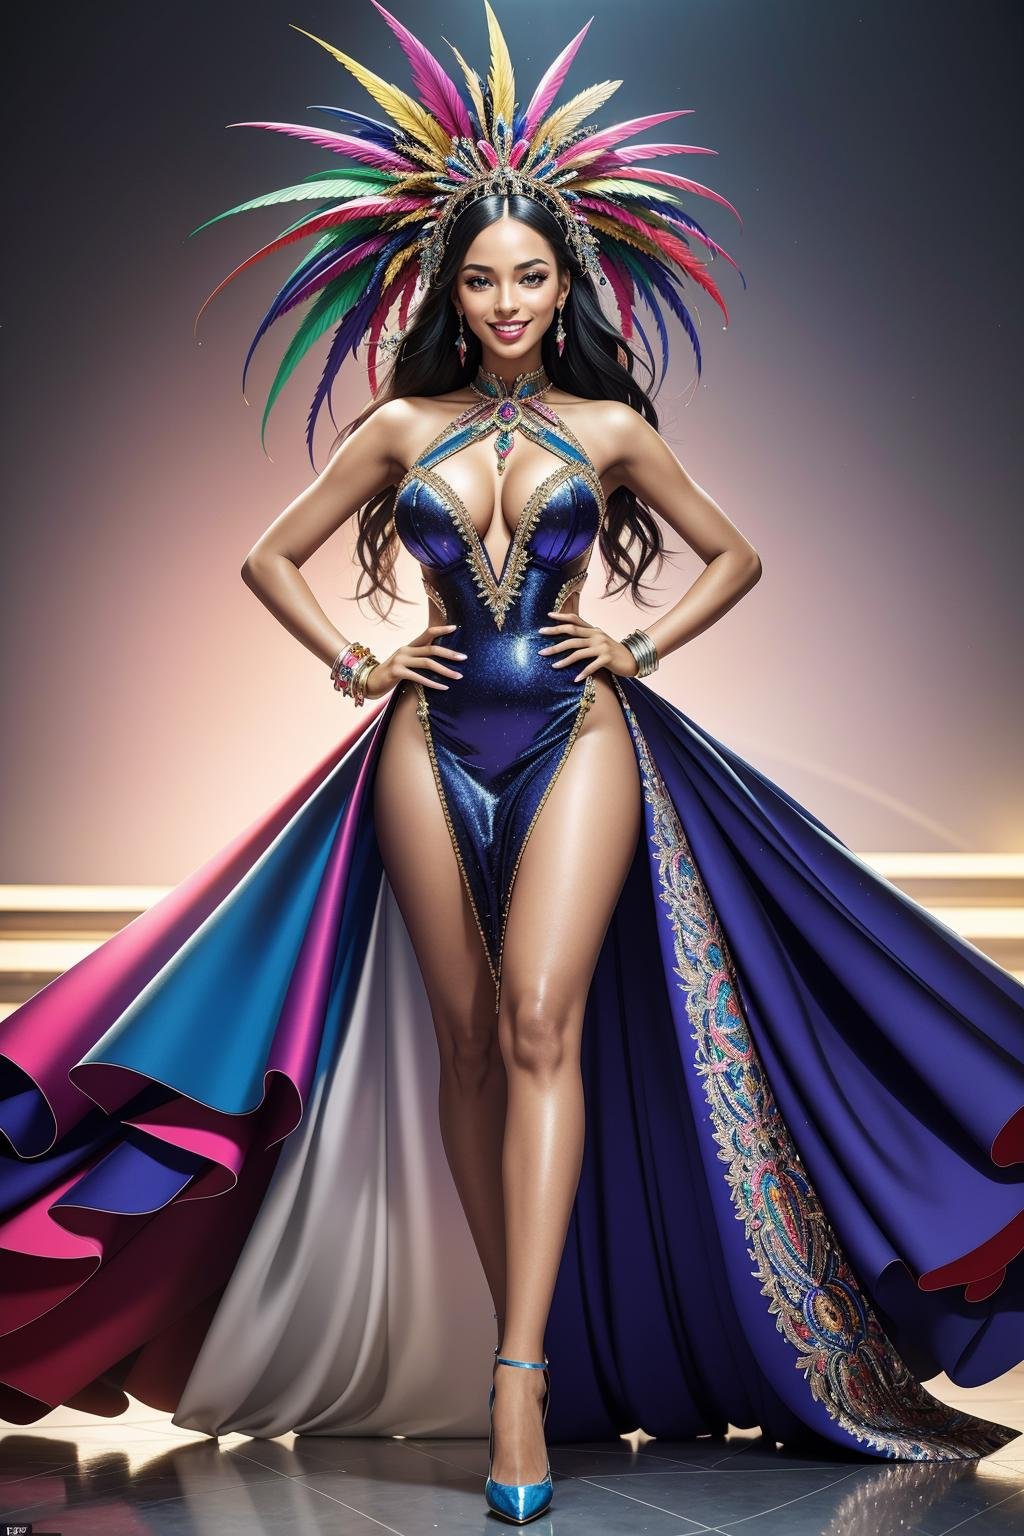 ((Masterpiece, best quality,edgQuality)), standing,posing for a picture,smiling,excited, Haute_Couture,edgCarnival, shiny dress, standing, full body, high heels,hands on hips, colorful,wearing edgCarnival Haute_Couture, designer dress <lora:edgLycorisCarnival:1>